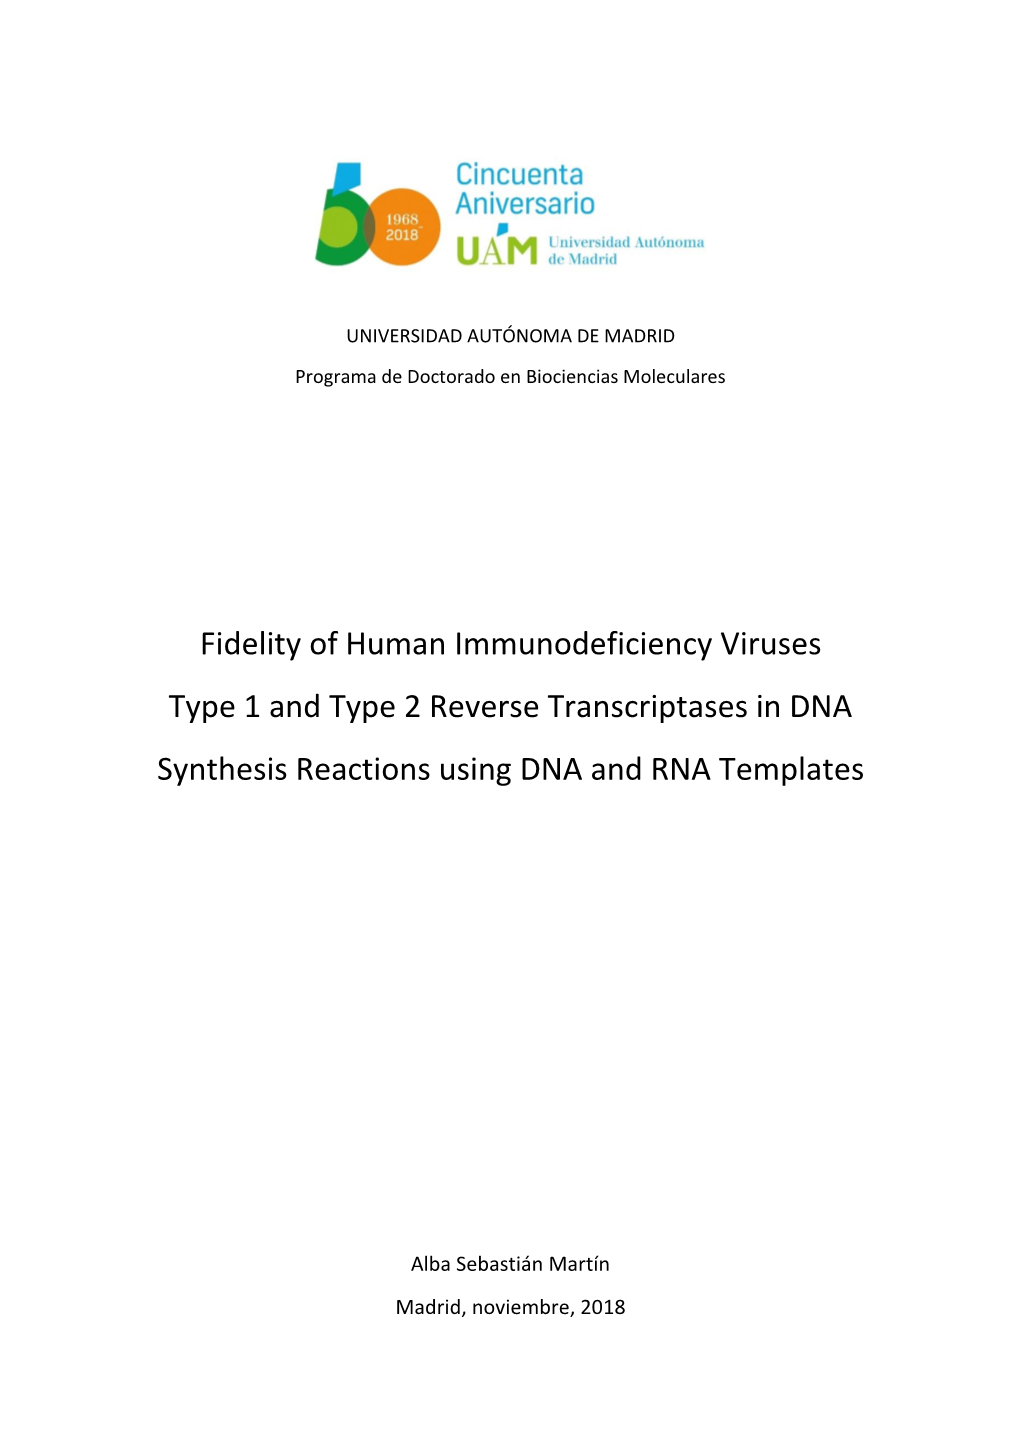 Fidelity of Human Immunodeficiency Viruses Type 1 and Type 2 Reverse Transcriptases in DNA Synthesis Reactions Using DNA and RNA Templates